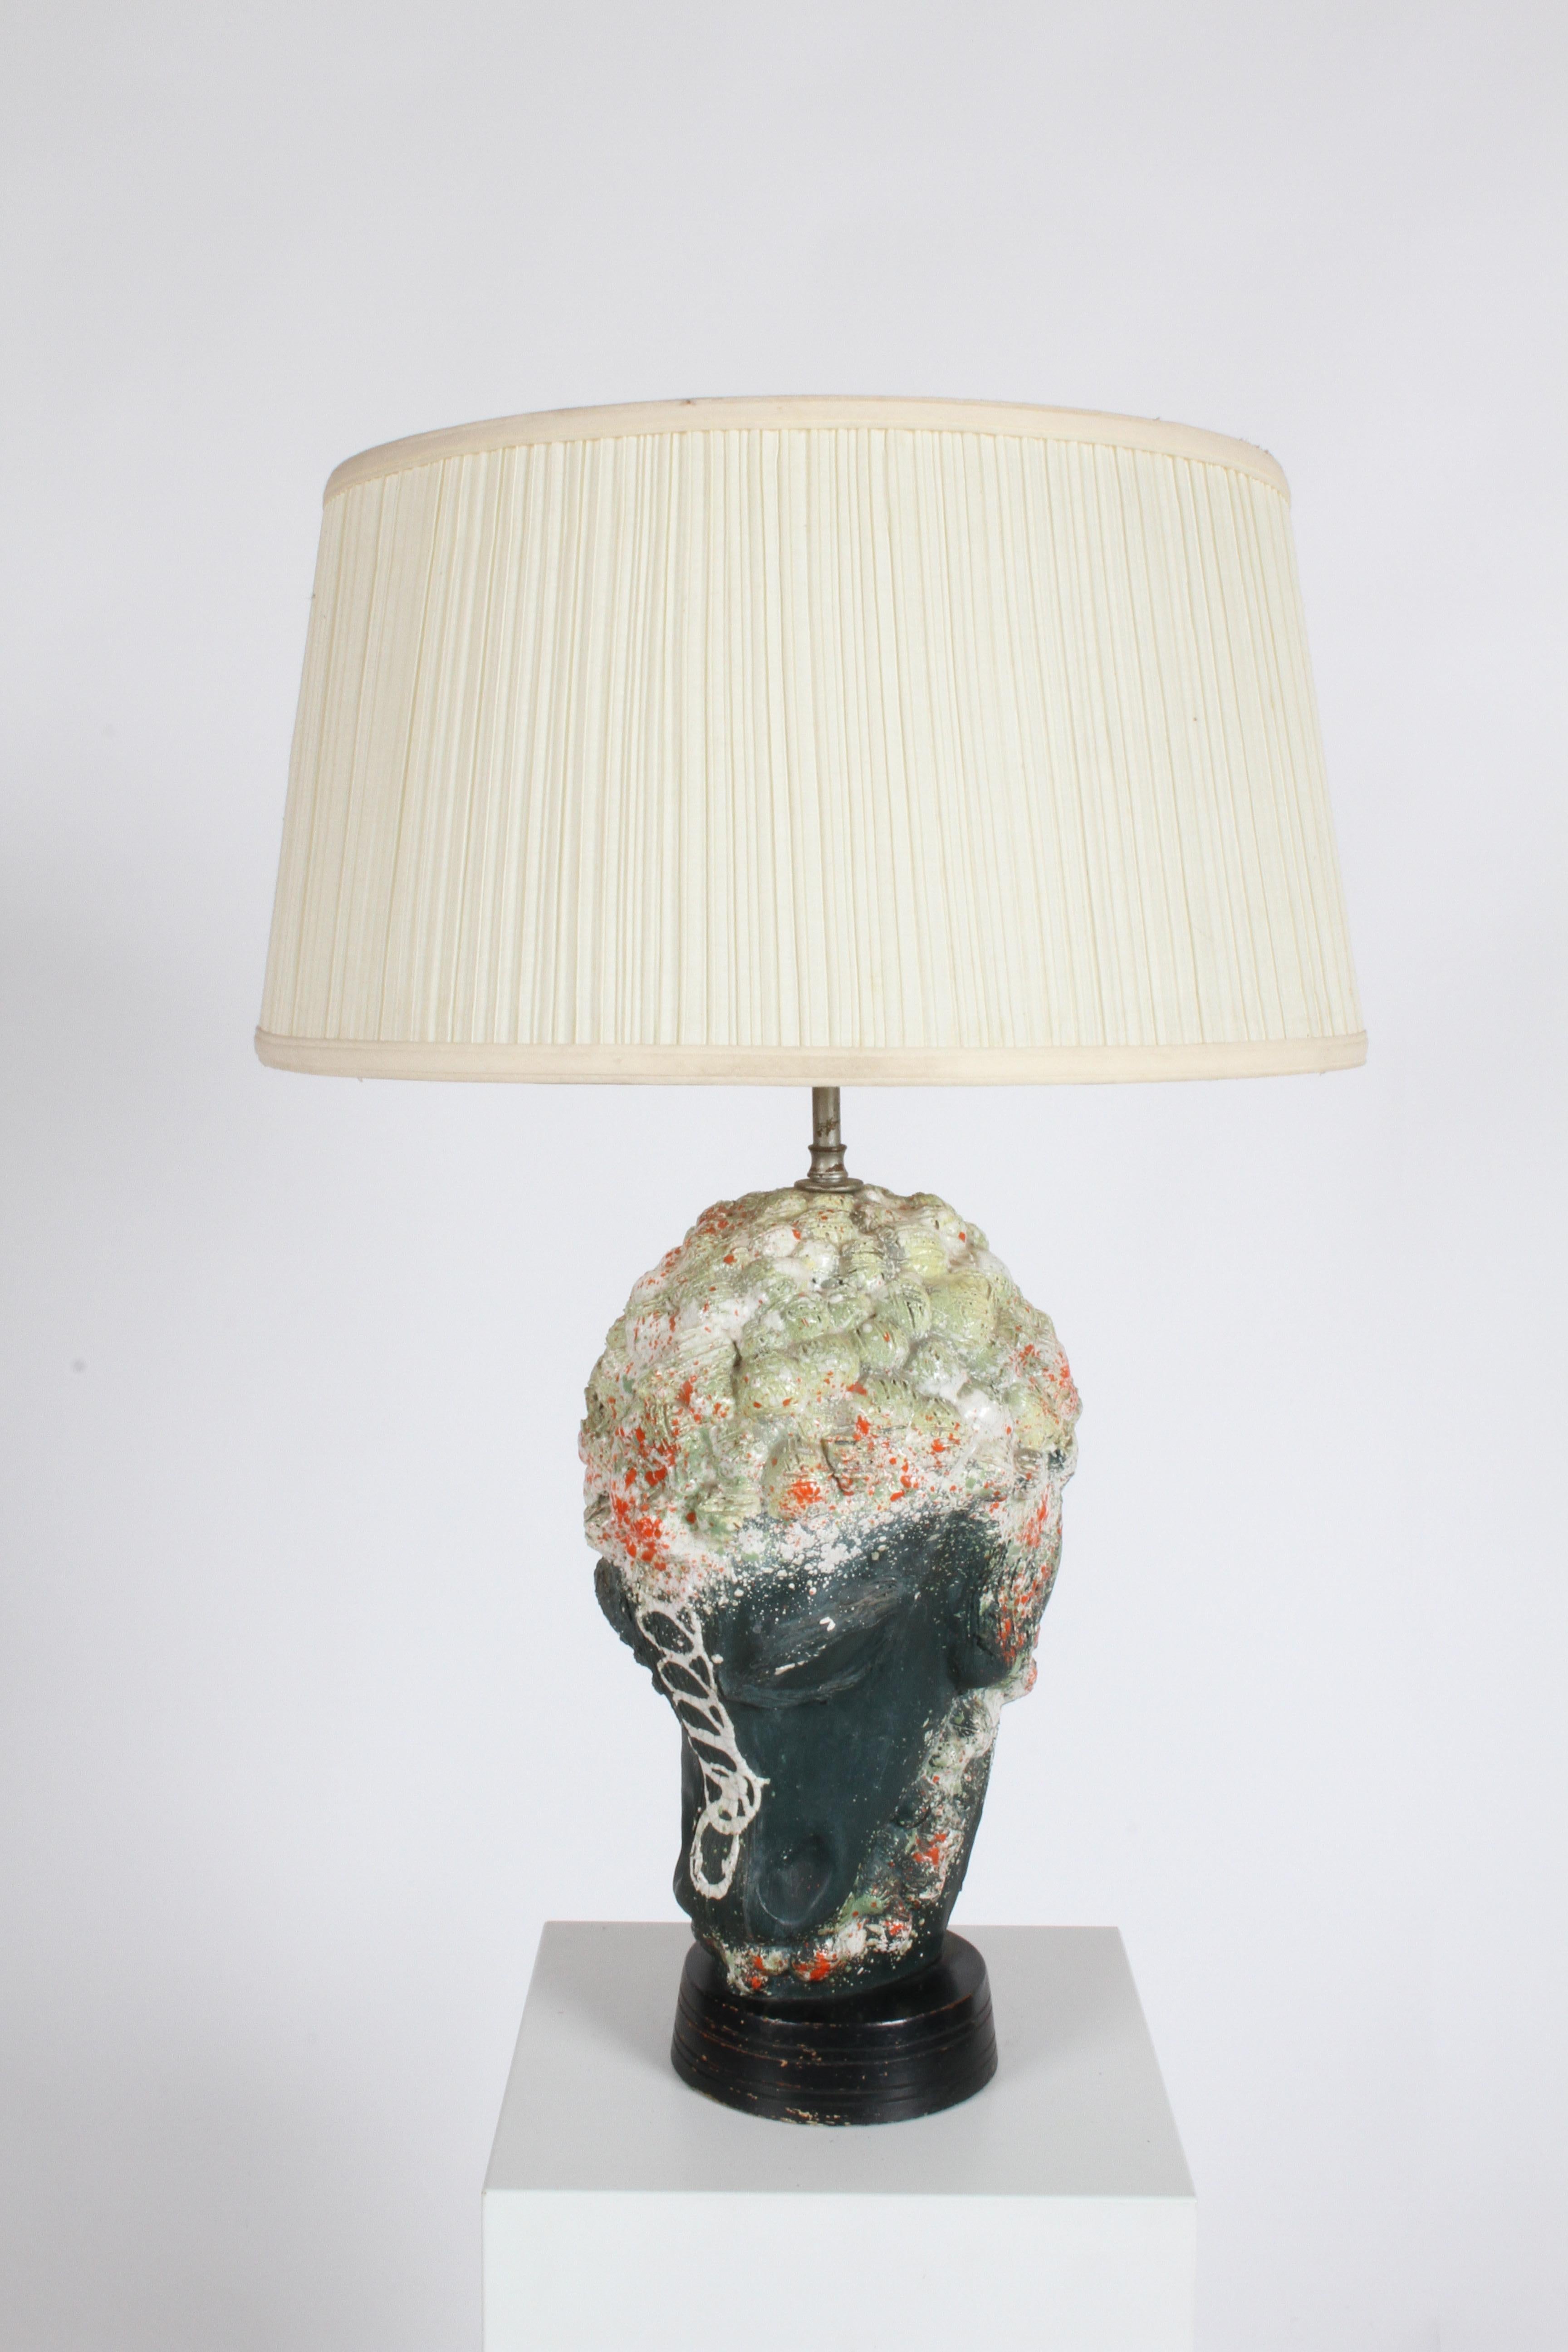 Pair of possibly unique large Mid-Century Modern Artistan studio Italian colorful glazed ceramic / pottery abstract horse head table lamps on round 6